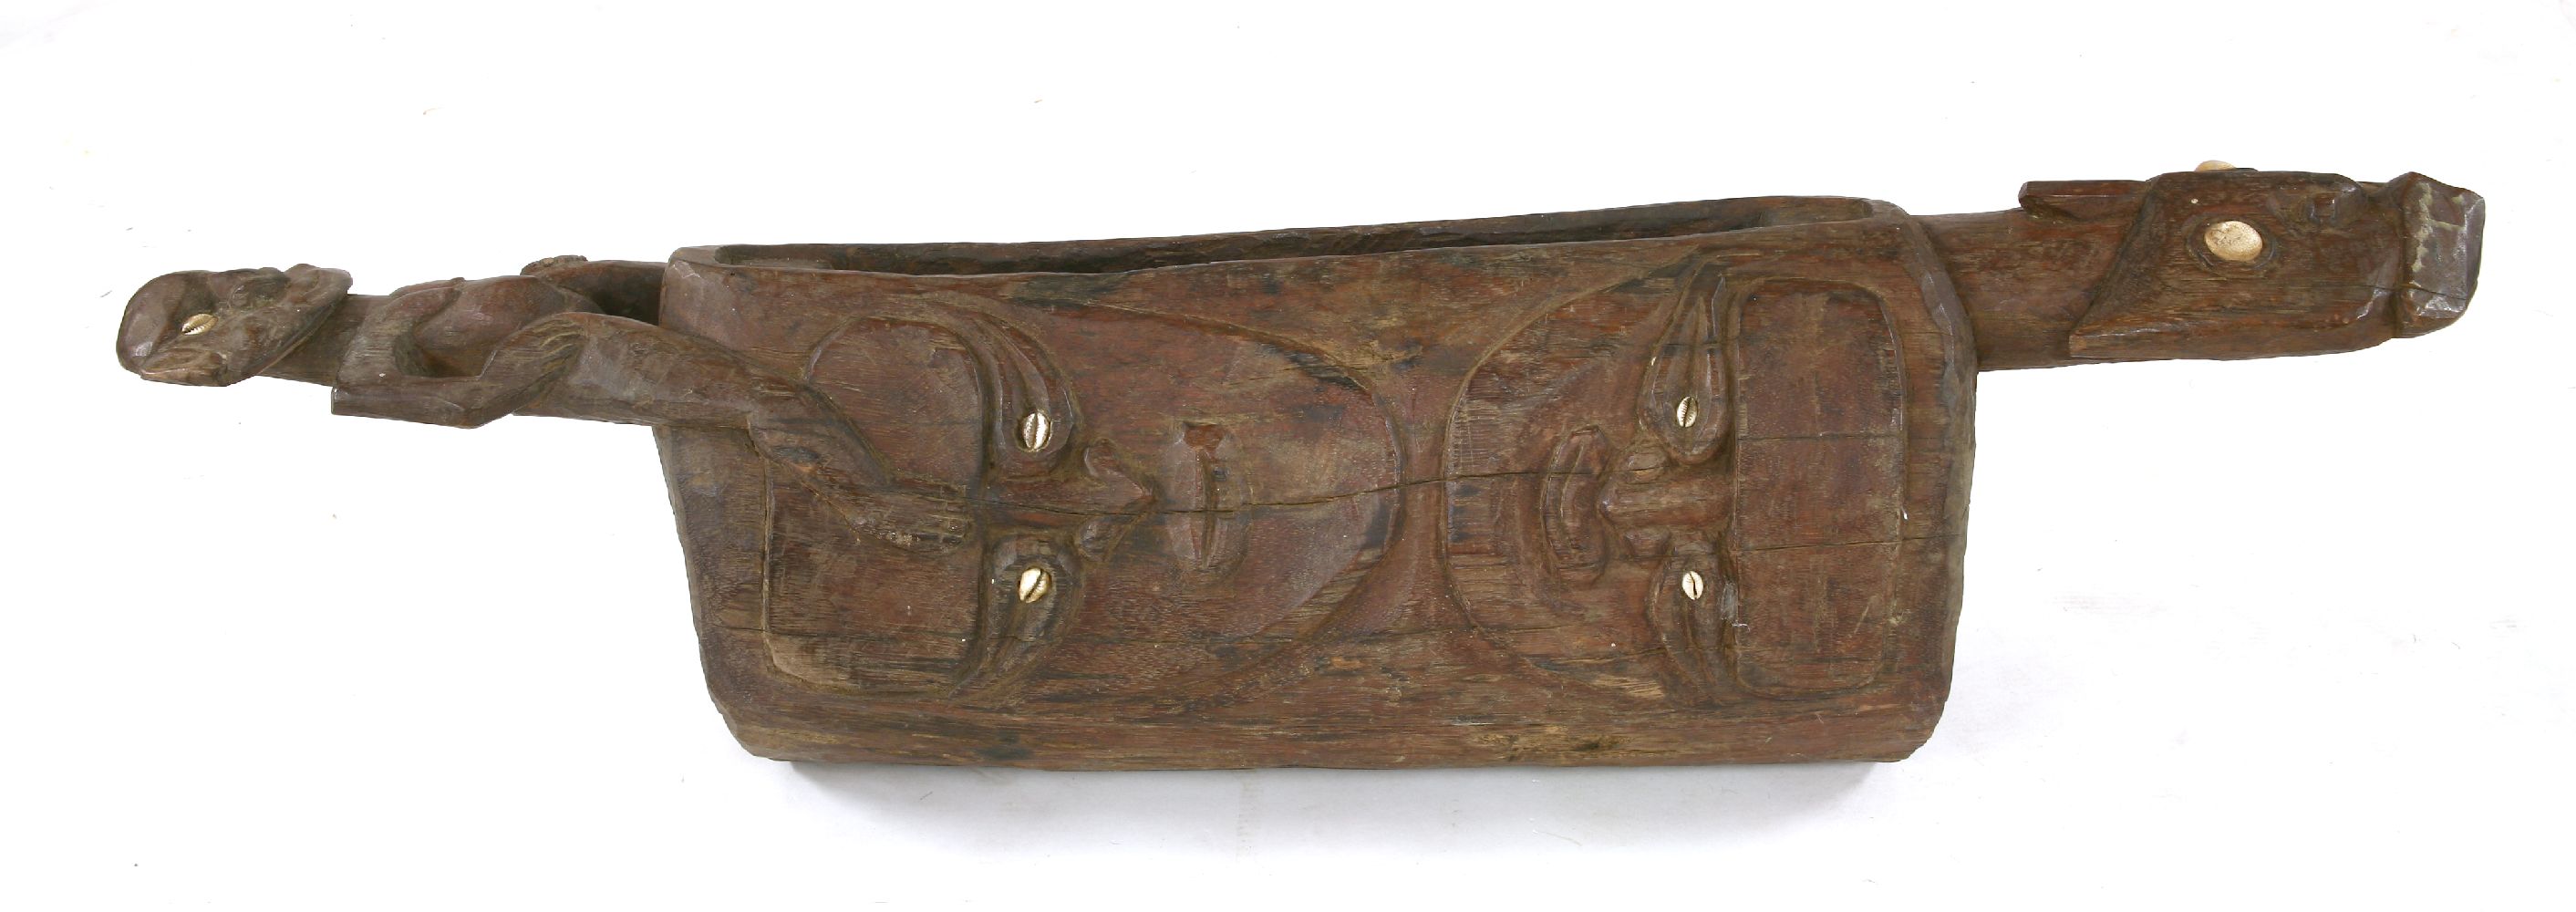 A SLIT DRUM,mid-20th century, a tribal carved wooden slit drum with shell decoration, from the Sepik